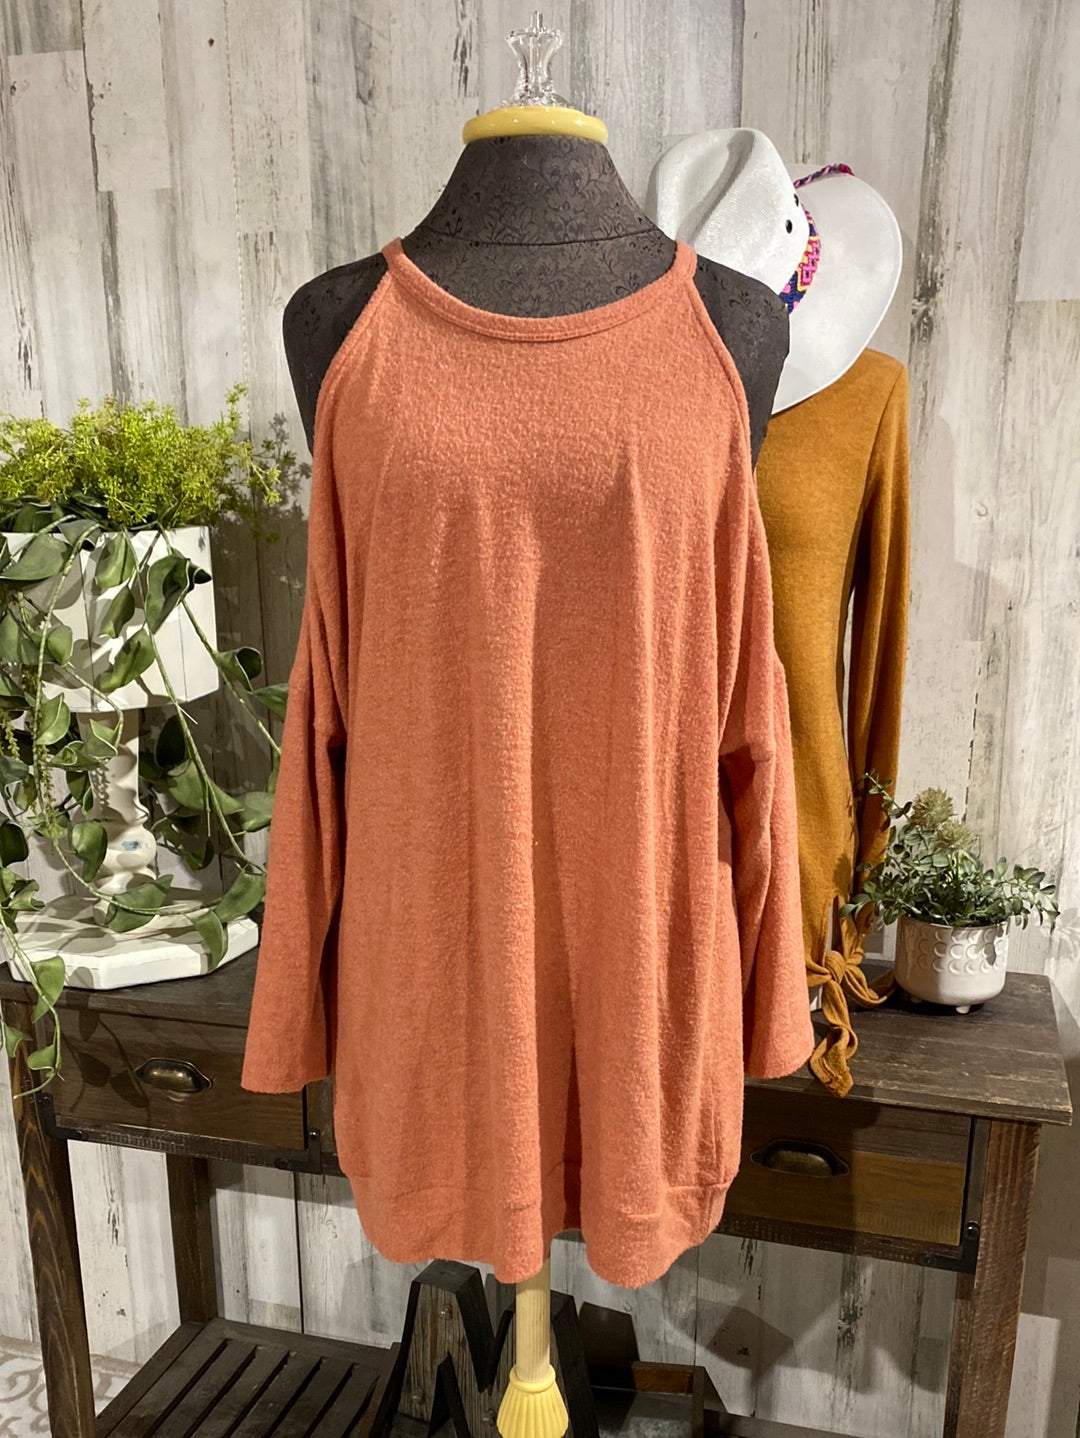 Womens Cold Shoulder 143 Story Top Large